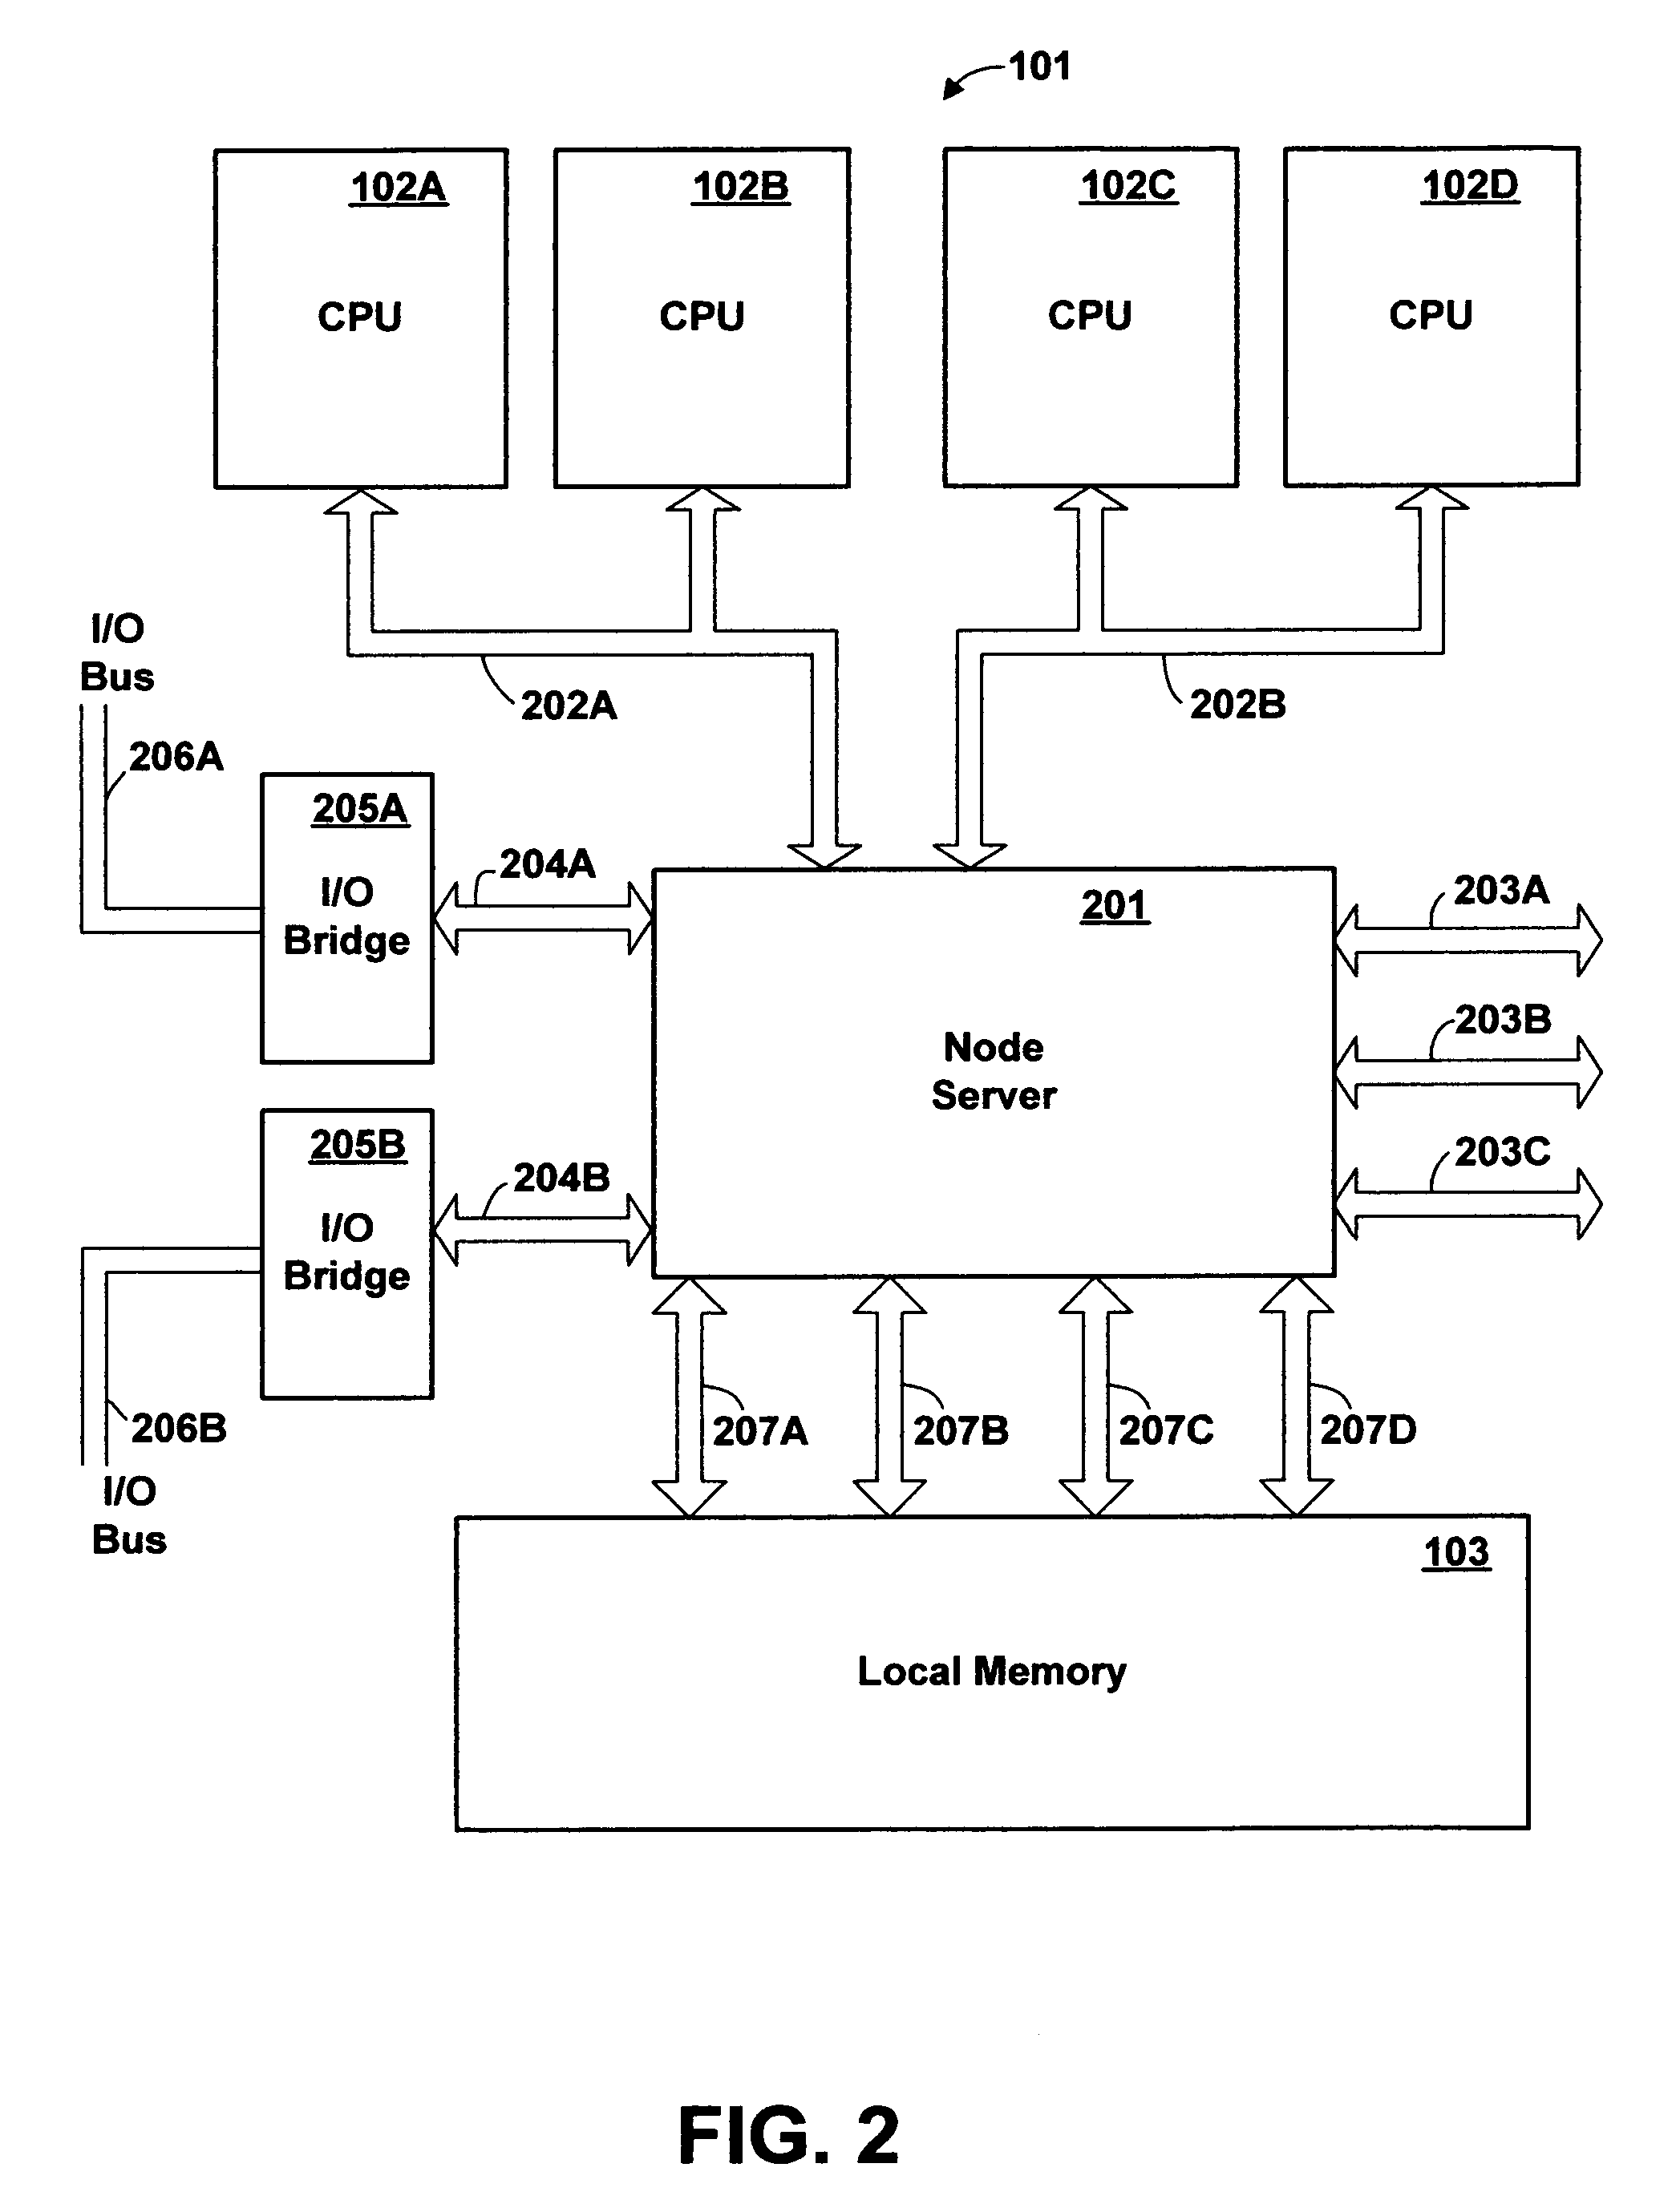 Method and apparatus for monitoring processes in a non-uniform memory access (NUMA) computer system